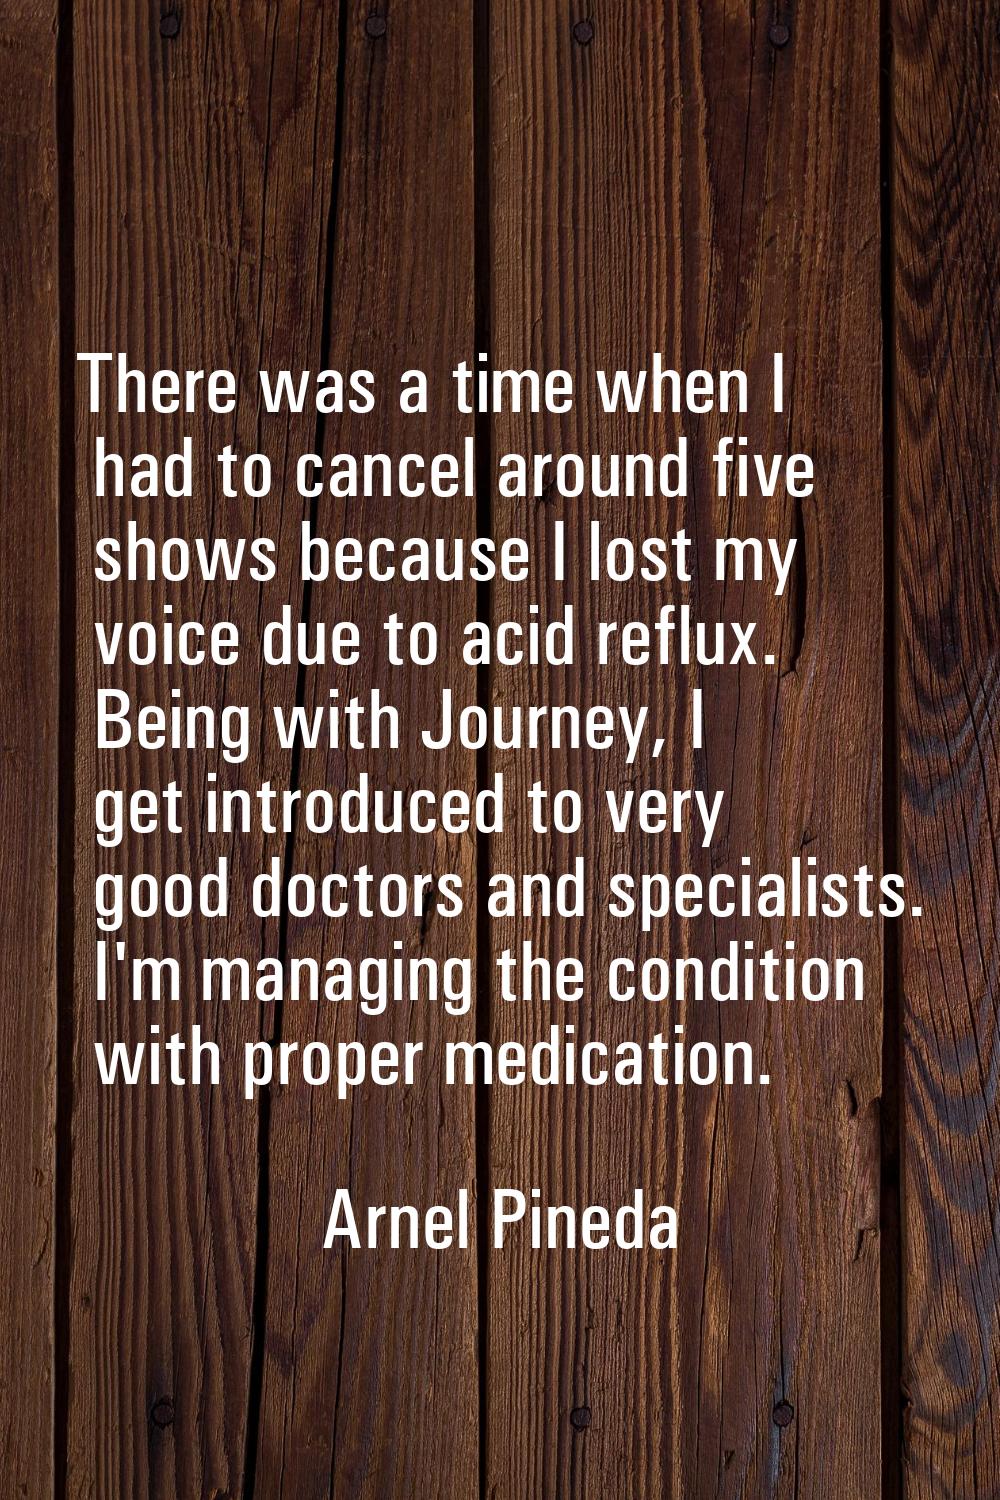 There was a time when I had to cancel around five shows because I lost my voice due to acid reflux.